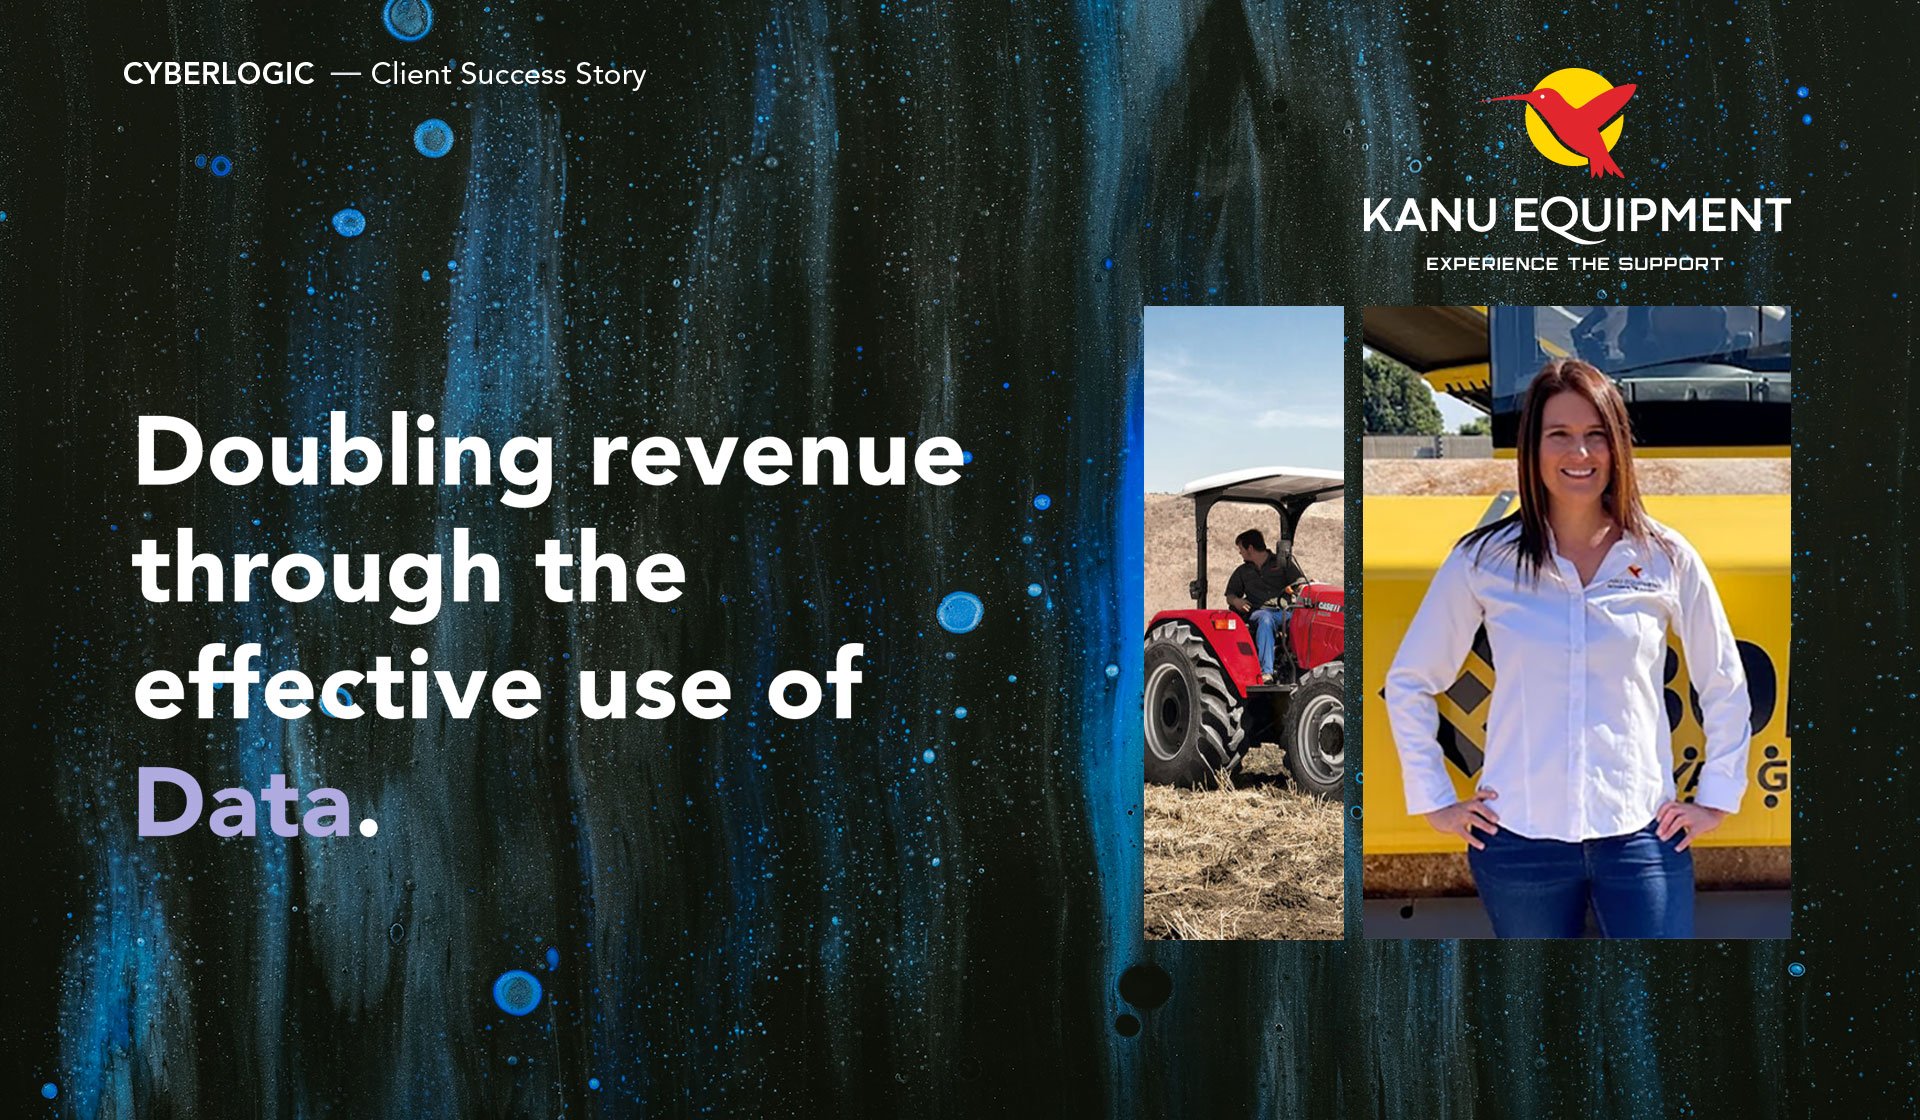 How Kanu Equipment doubled revenue through the effective use of data